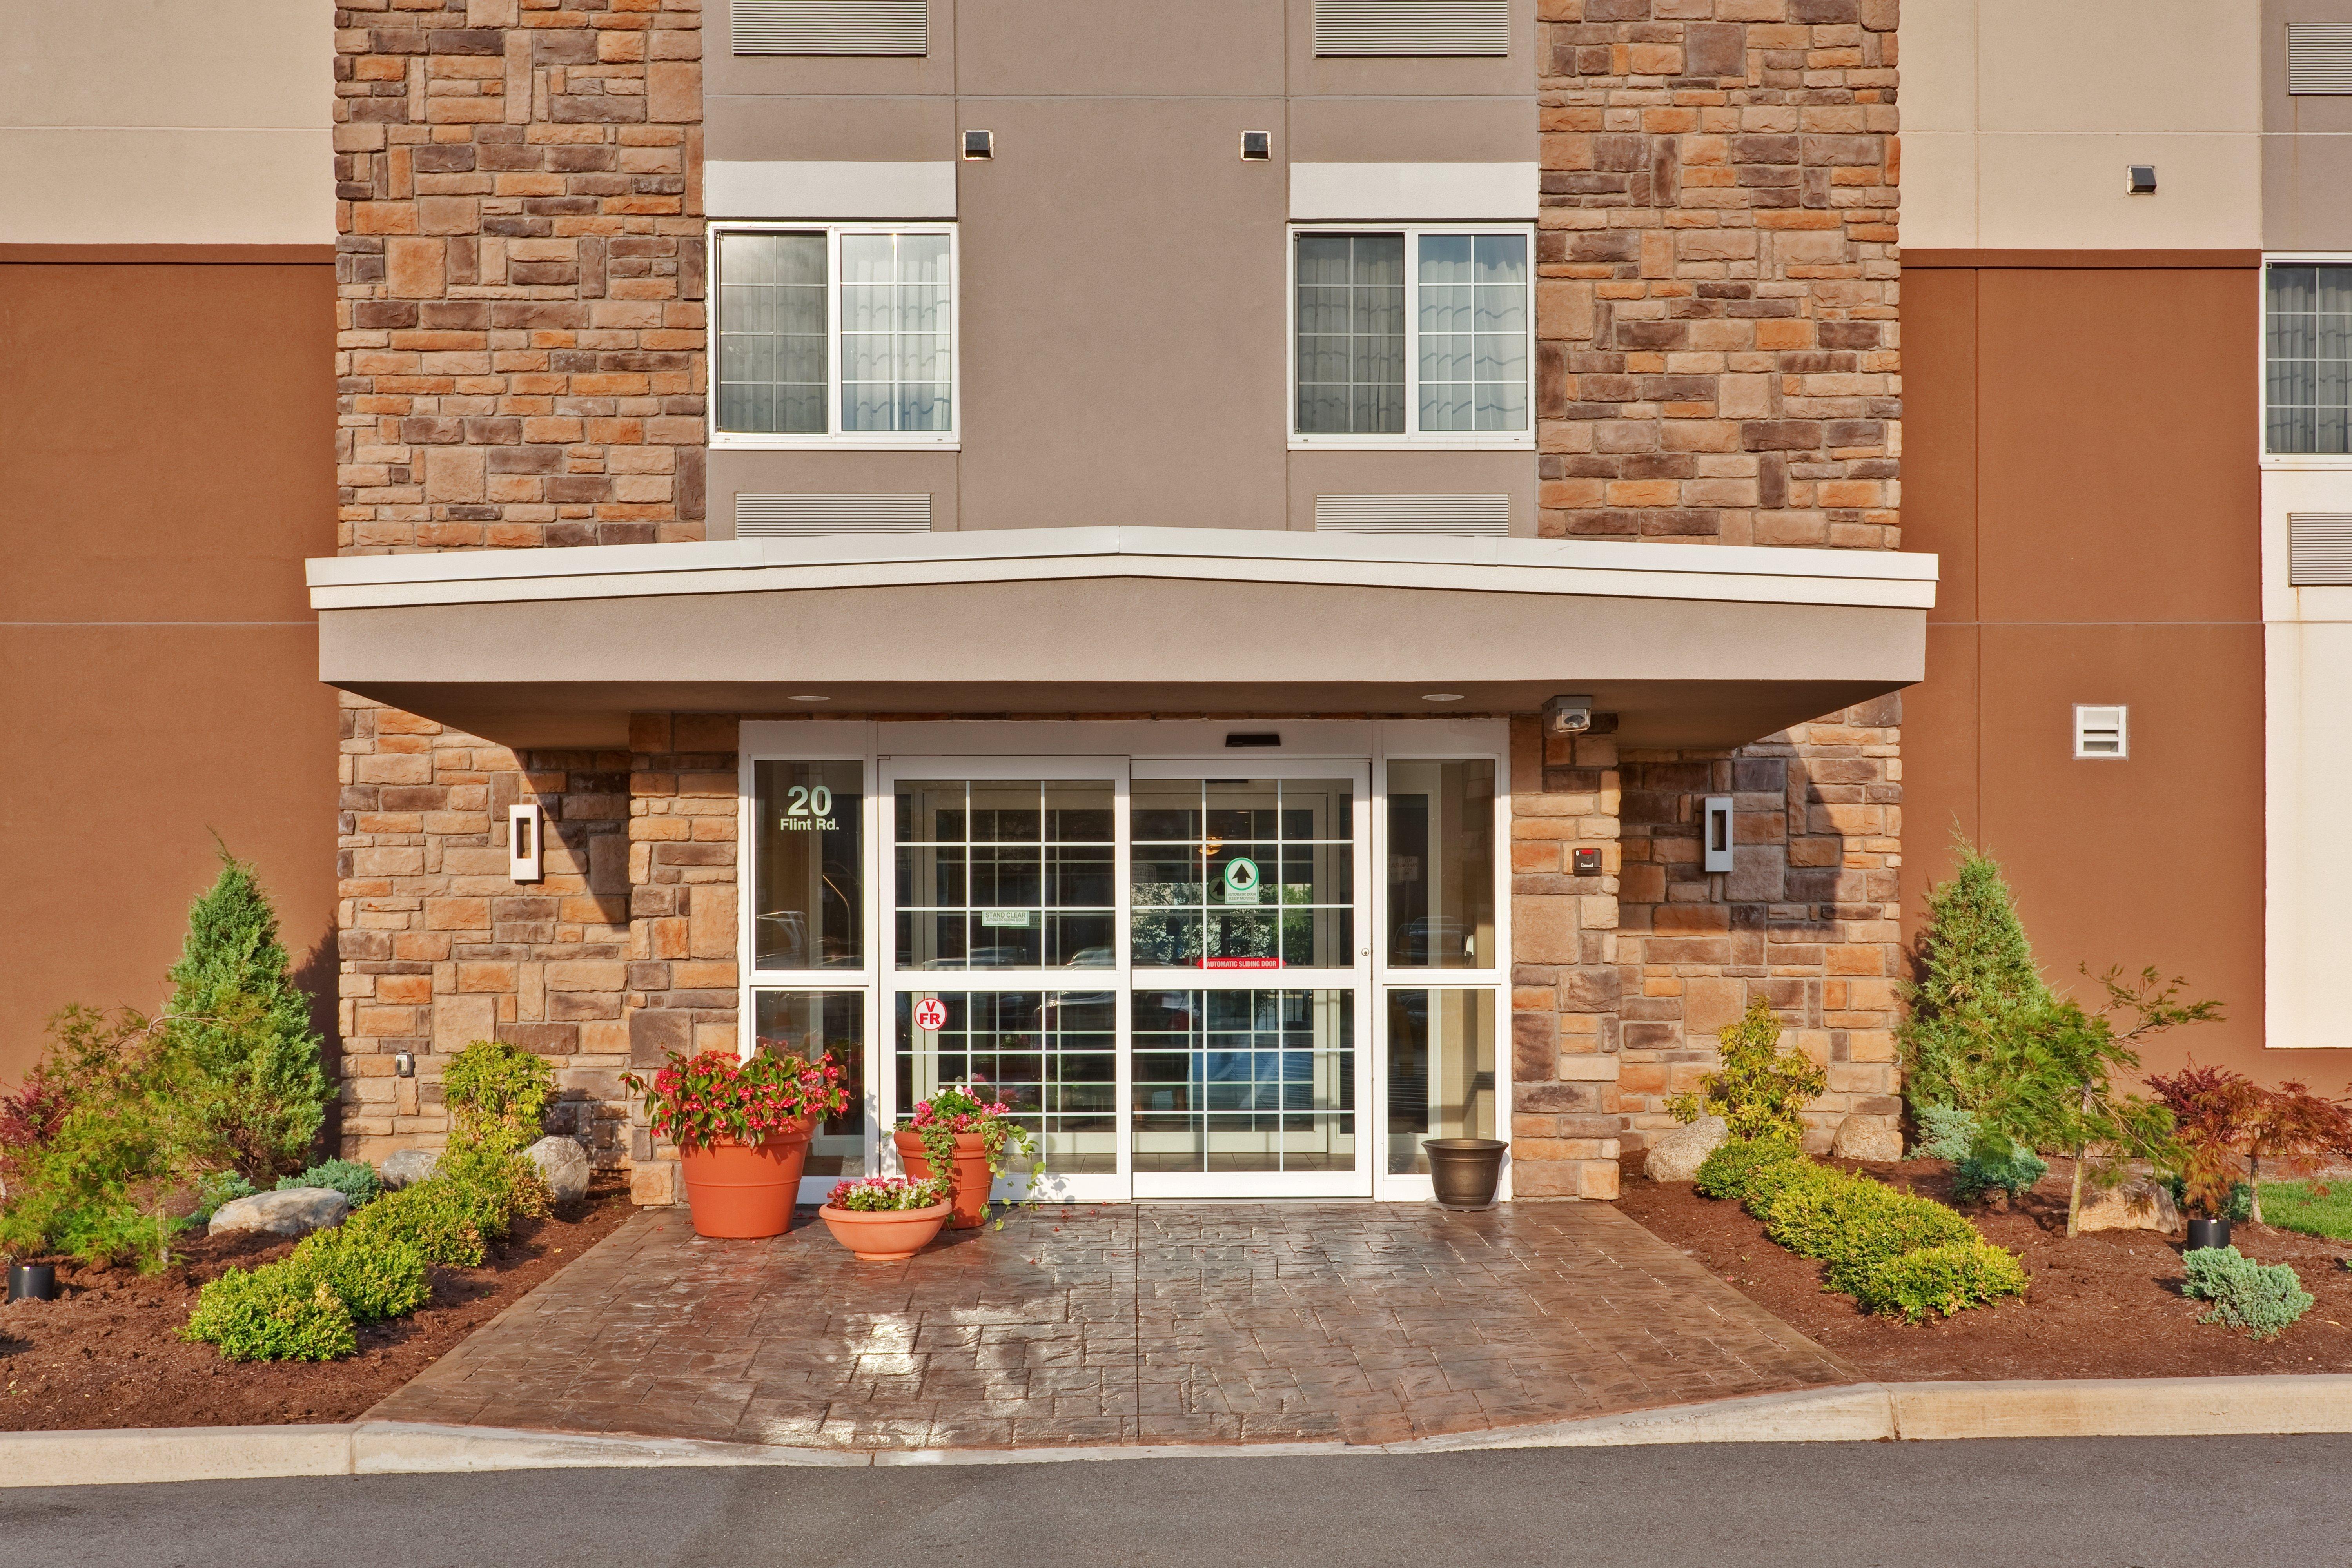 Candlewood Suites Buffalo Amherst Exterior foto